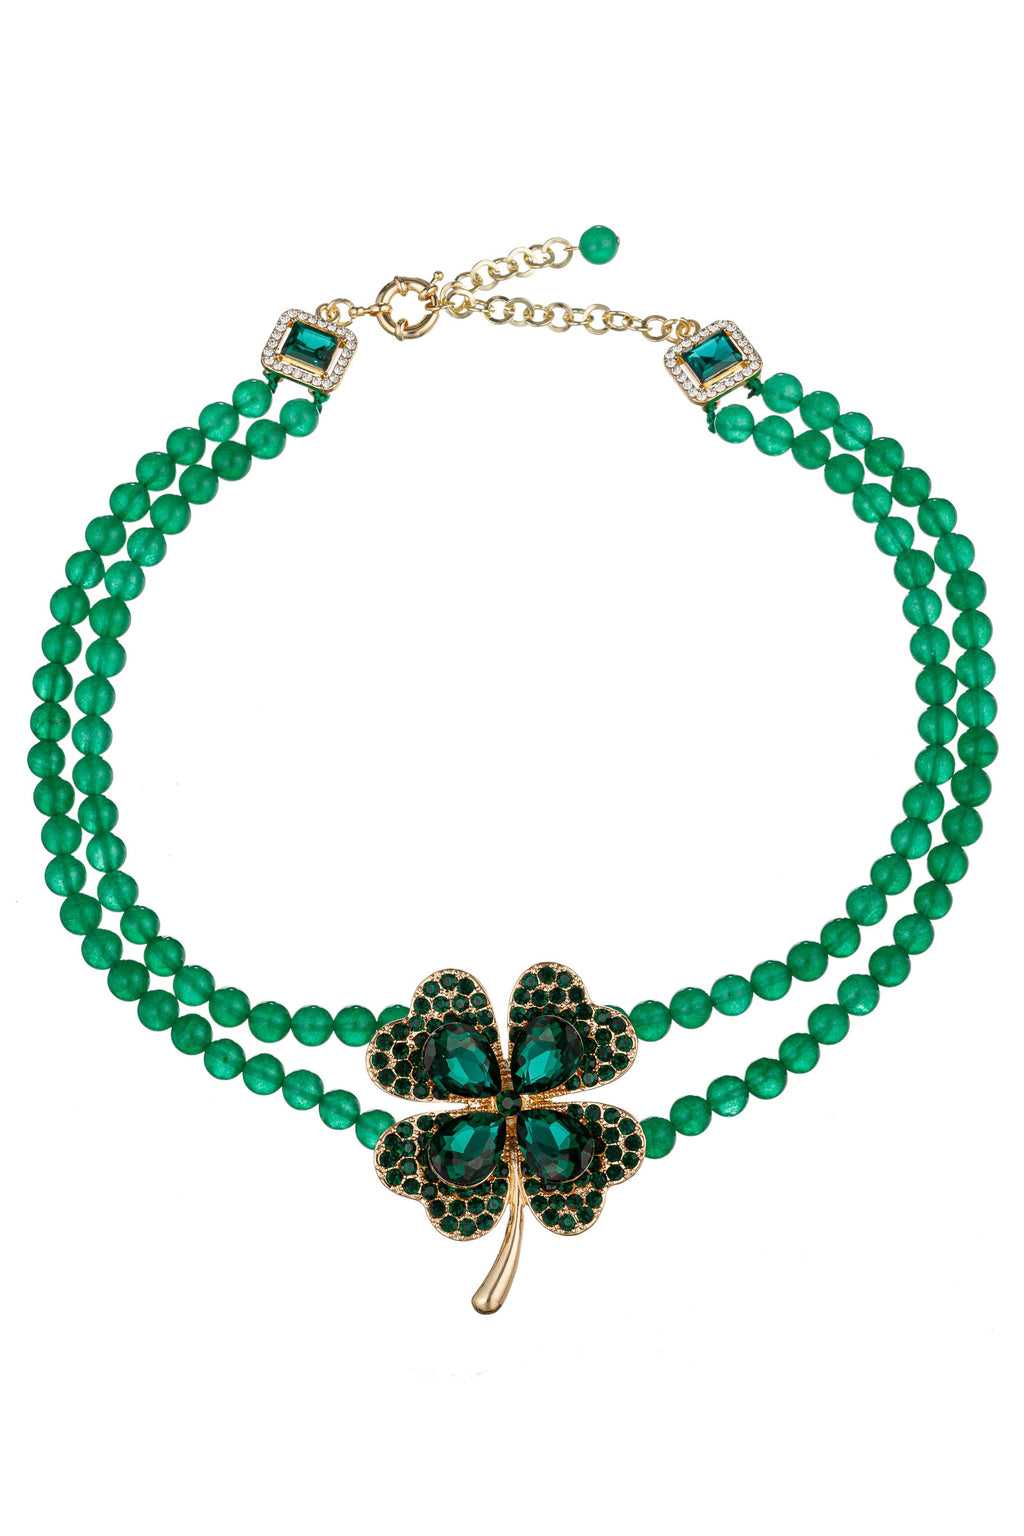 Enhance your style with this beaded necklace adorned with a green clover design, a symbol of luck and charm